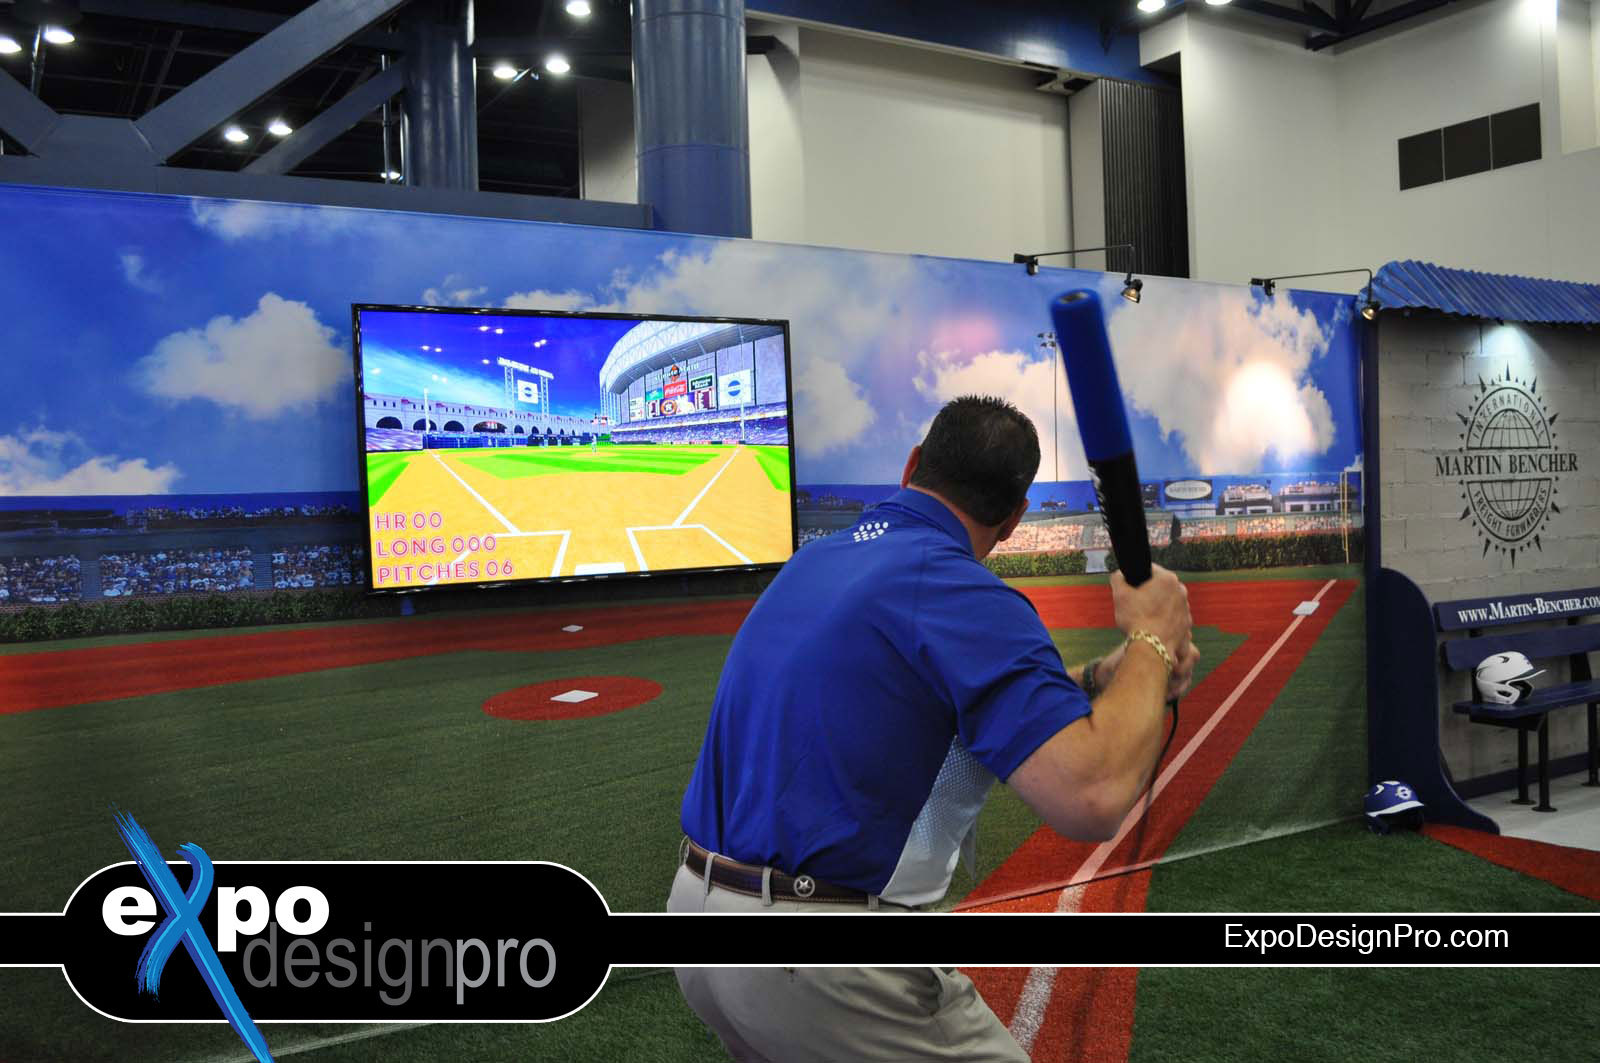 Do you need a baseball trade show design for your business? Call on Expo Design Pro to help you.